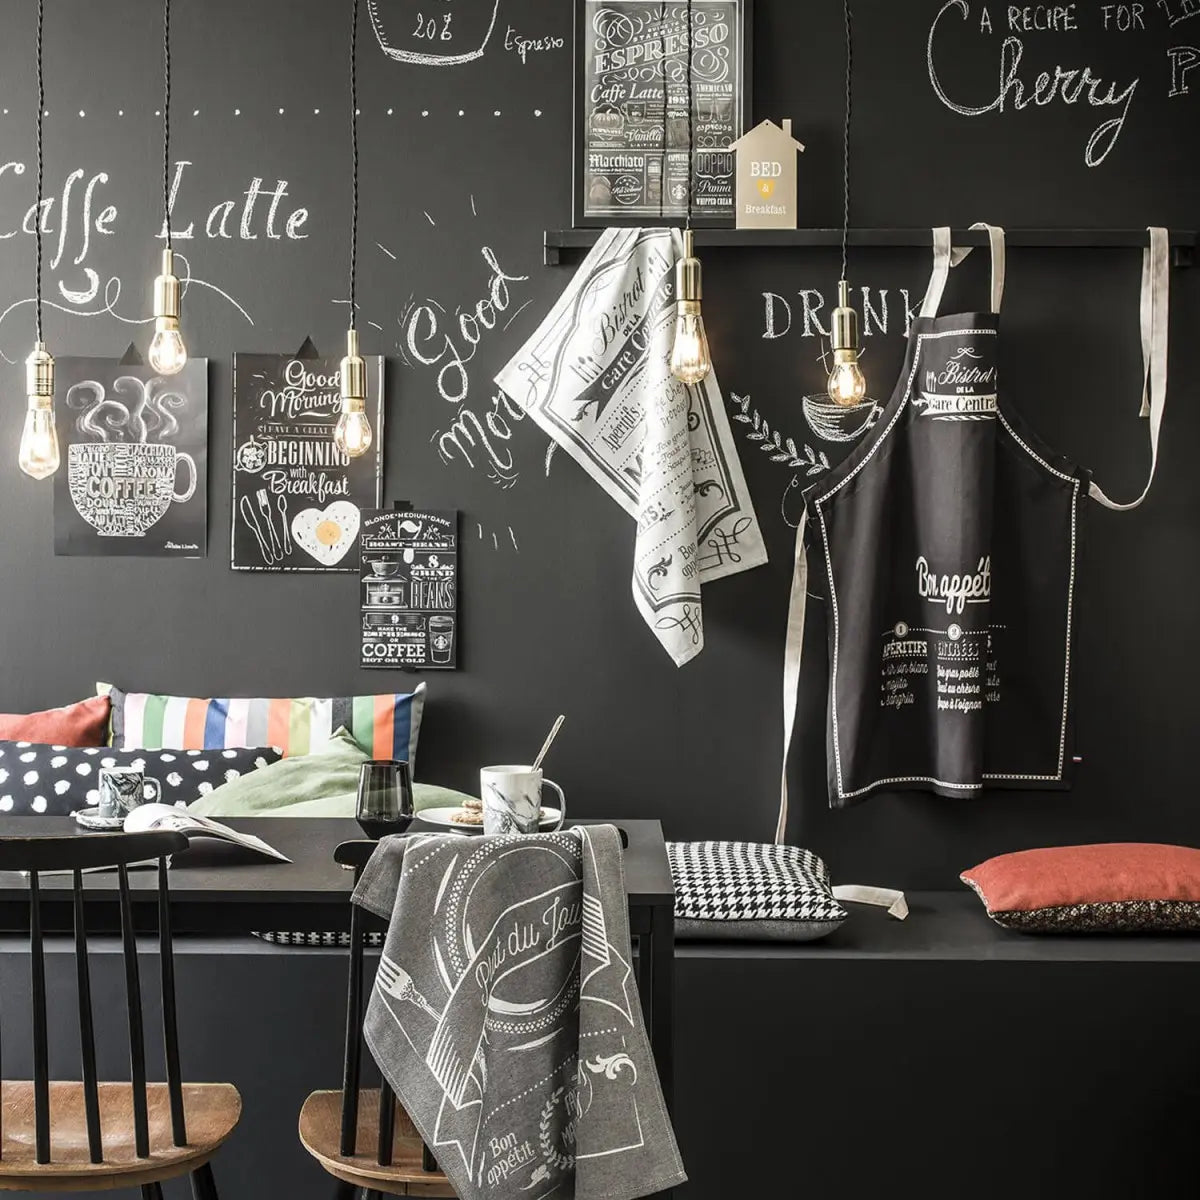 Coucke Au Menu Jacquard Kitchen Towel hung in a room with a chalk board wall and furniture .